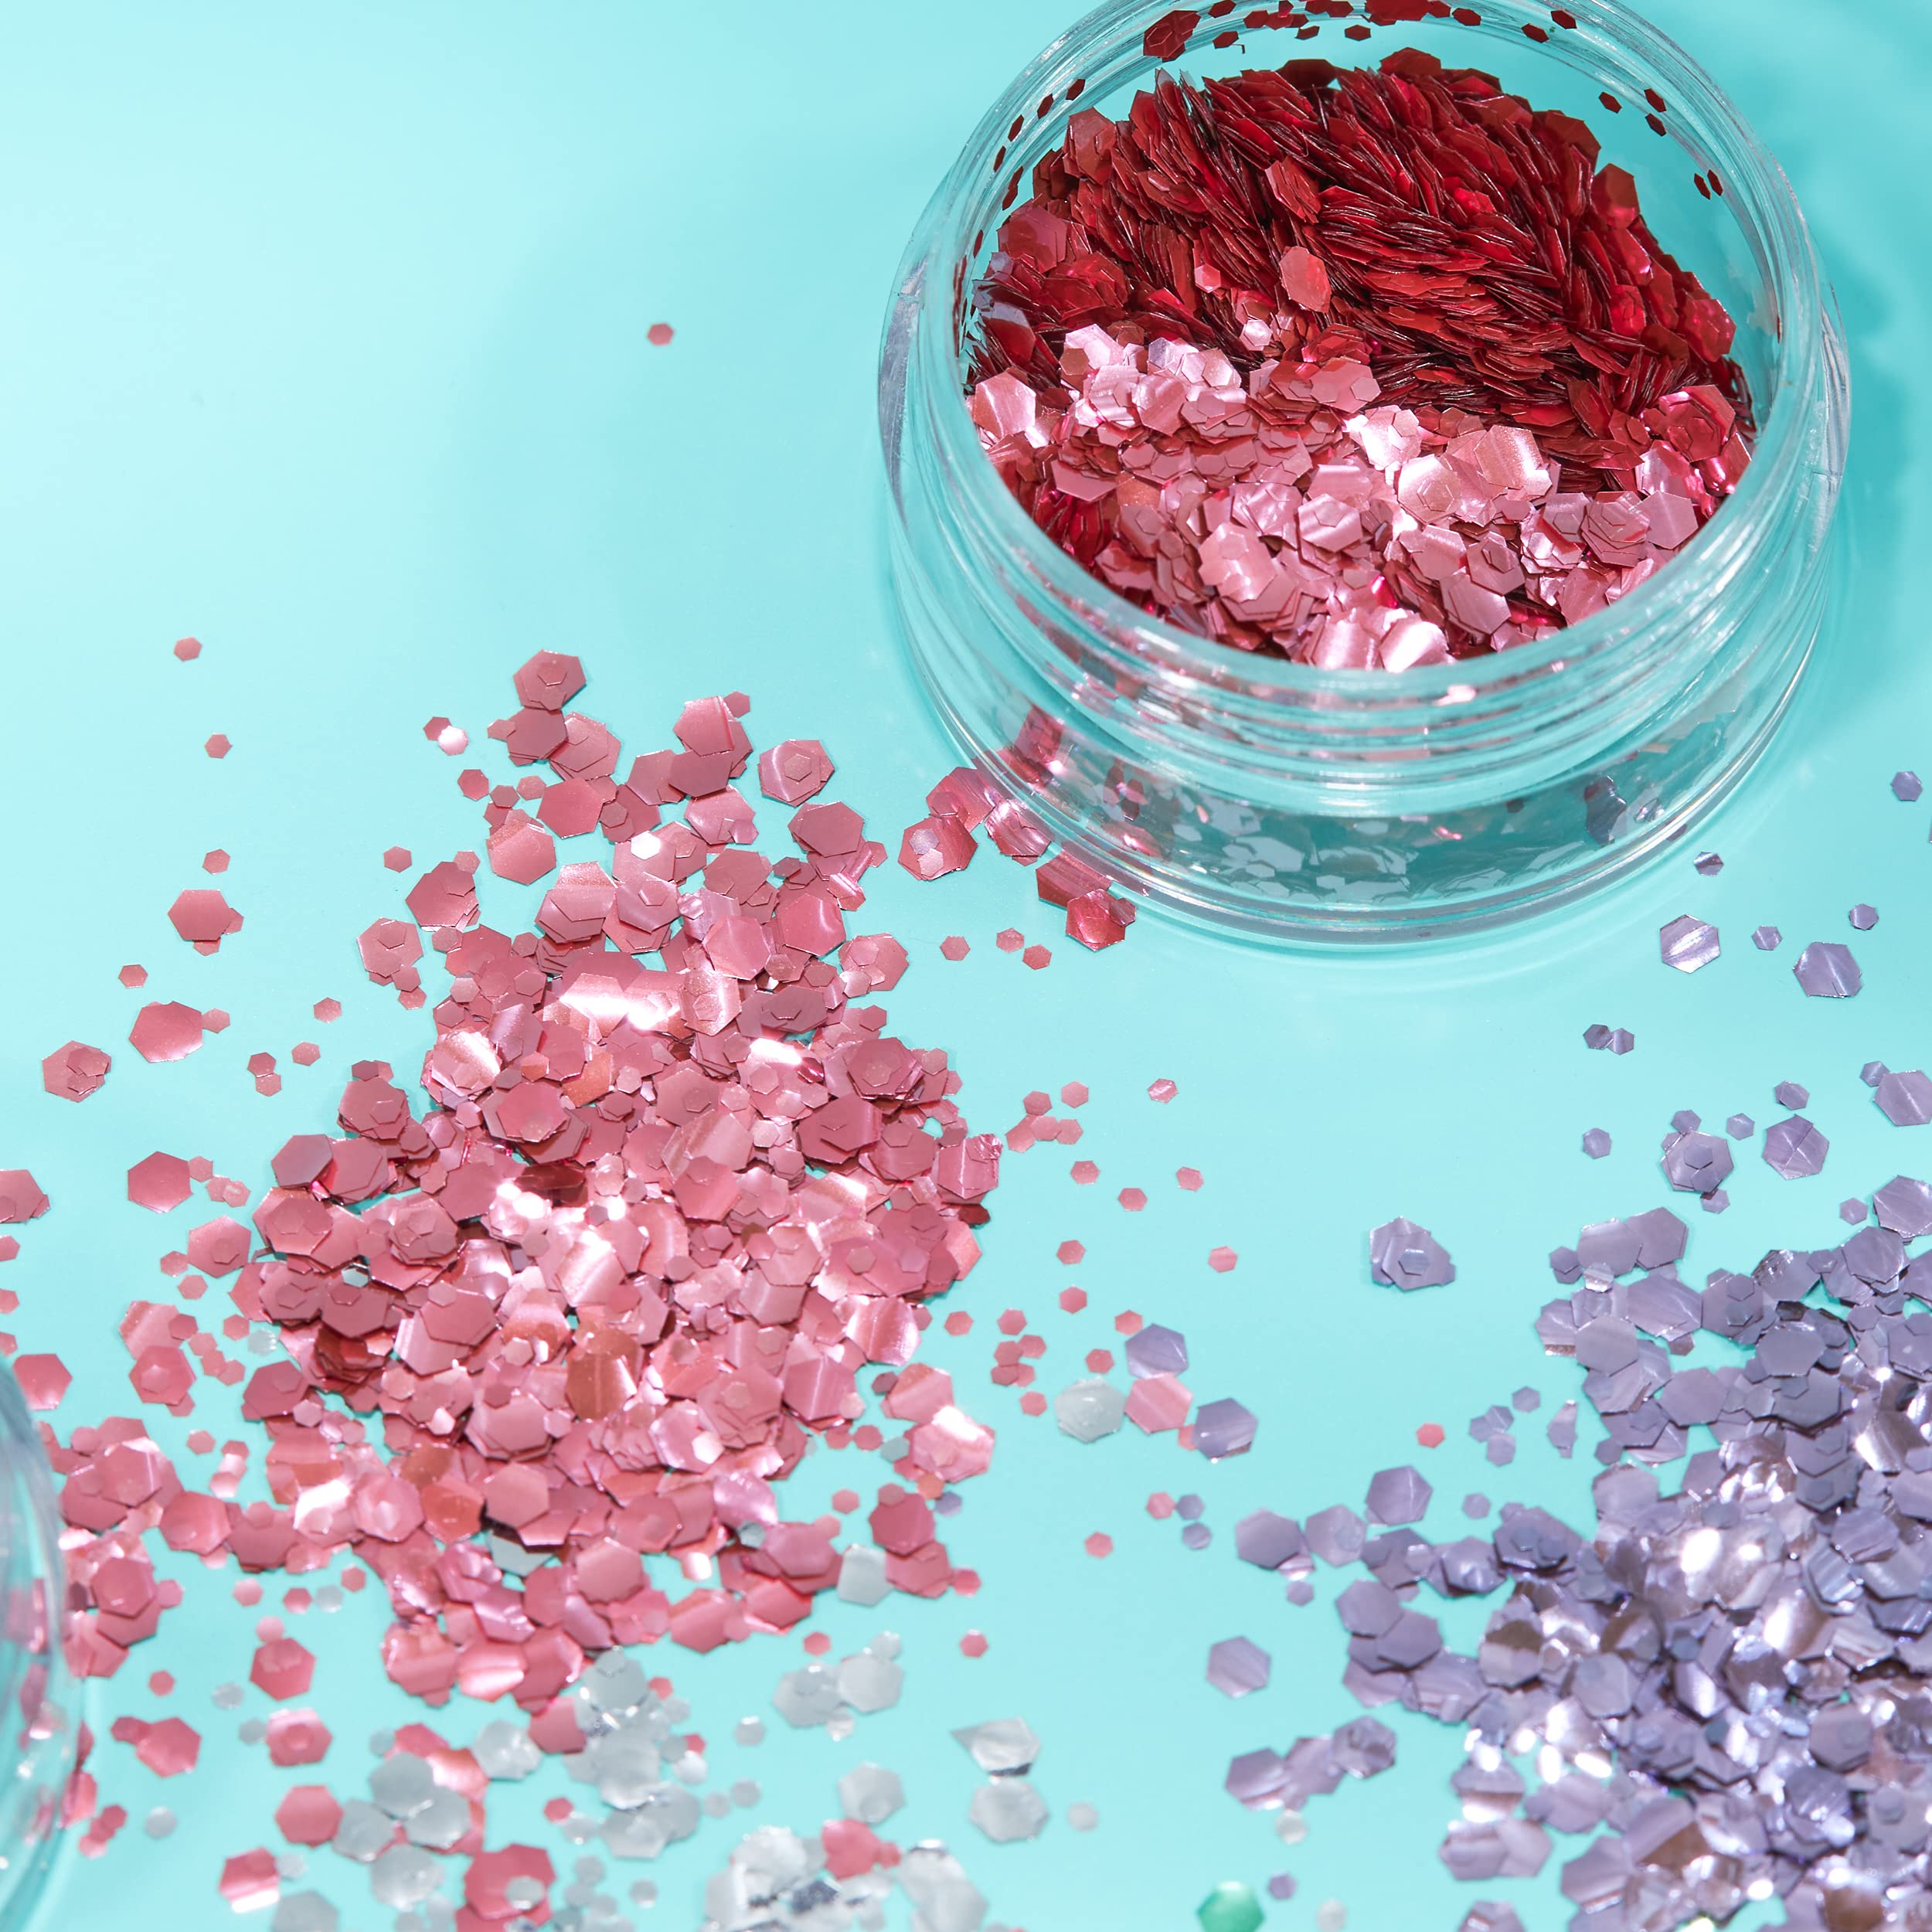 Biodegradable Eco Chunky Glitter by Moon Glitter - 100% Cosmetic Bio Glitter for Face, Body, Nails, Hair and Lips - 3g - Set of 5 - plus Glitter Fix Gel